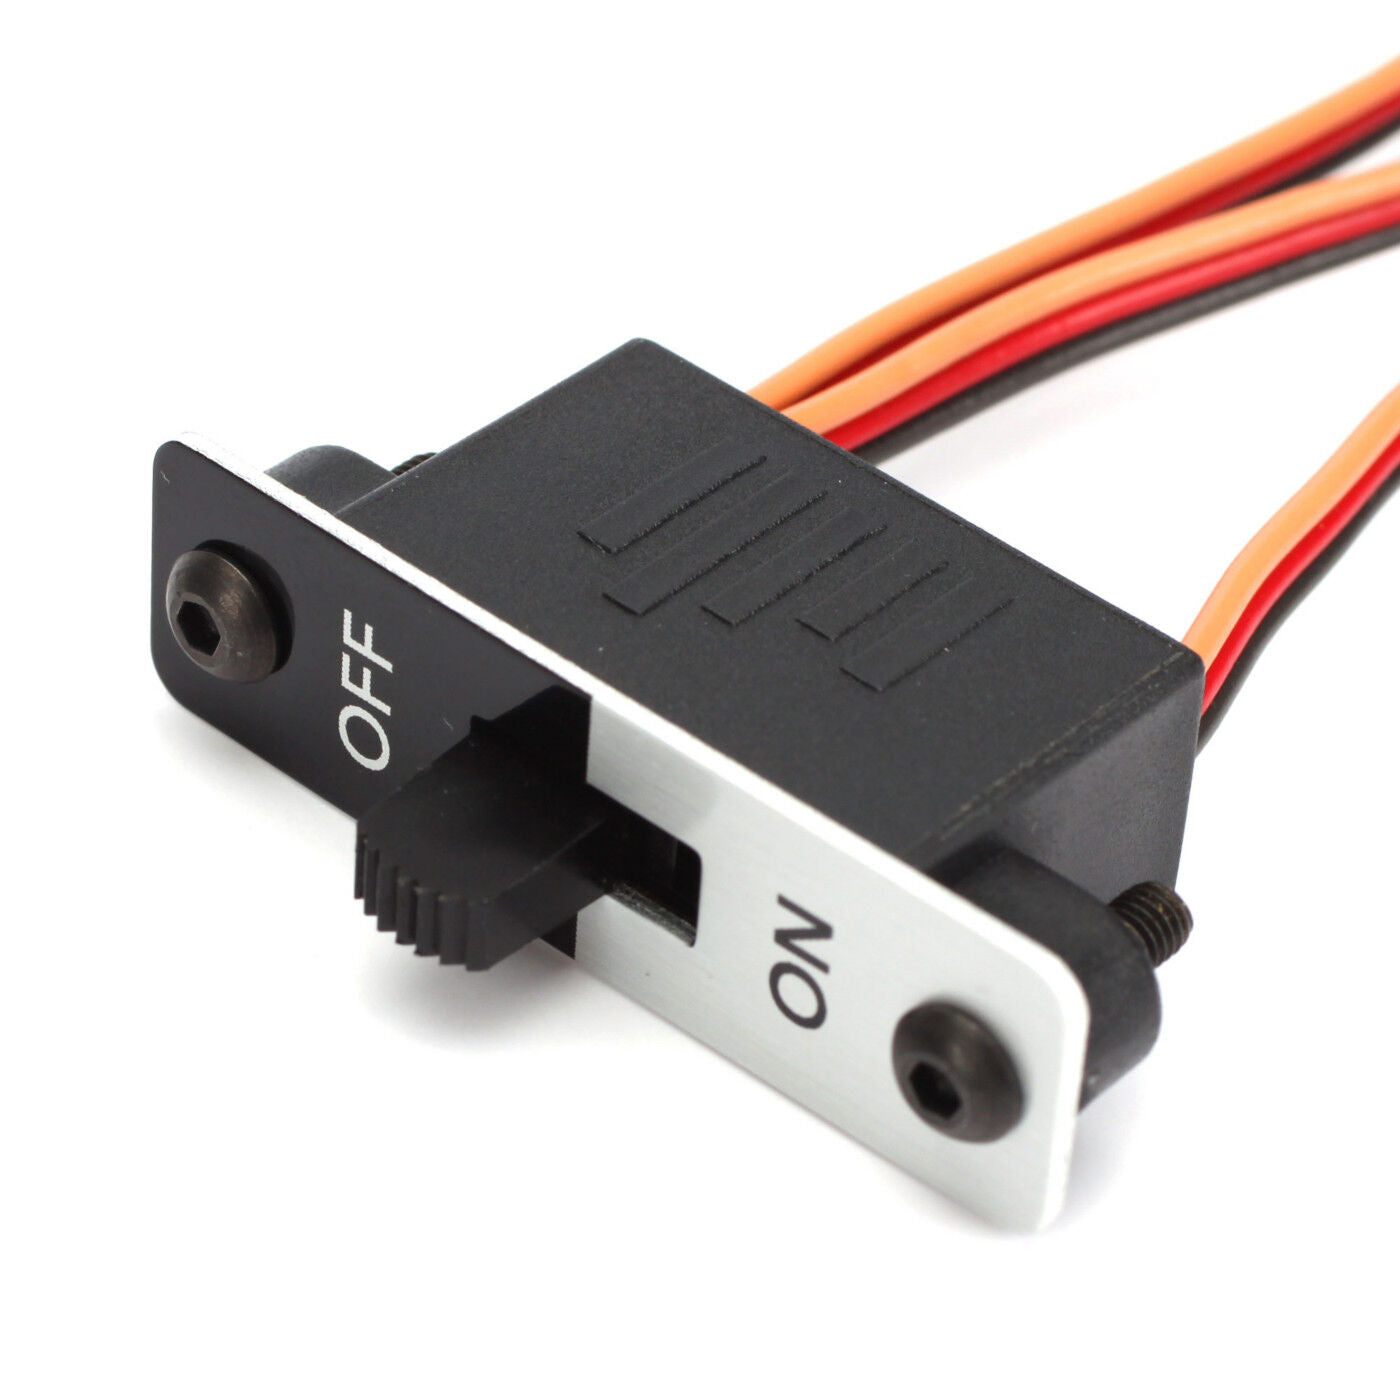 SPM9532: Deluxe 3-Wire Switch Harness